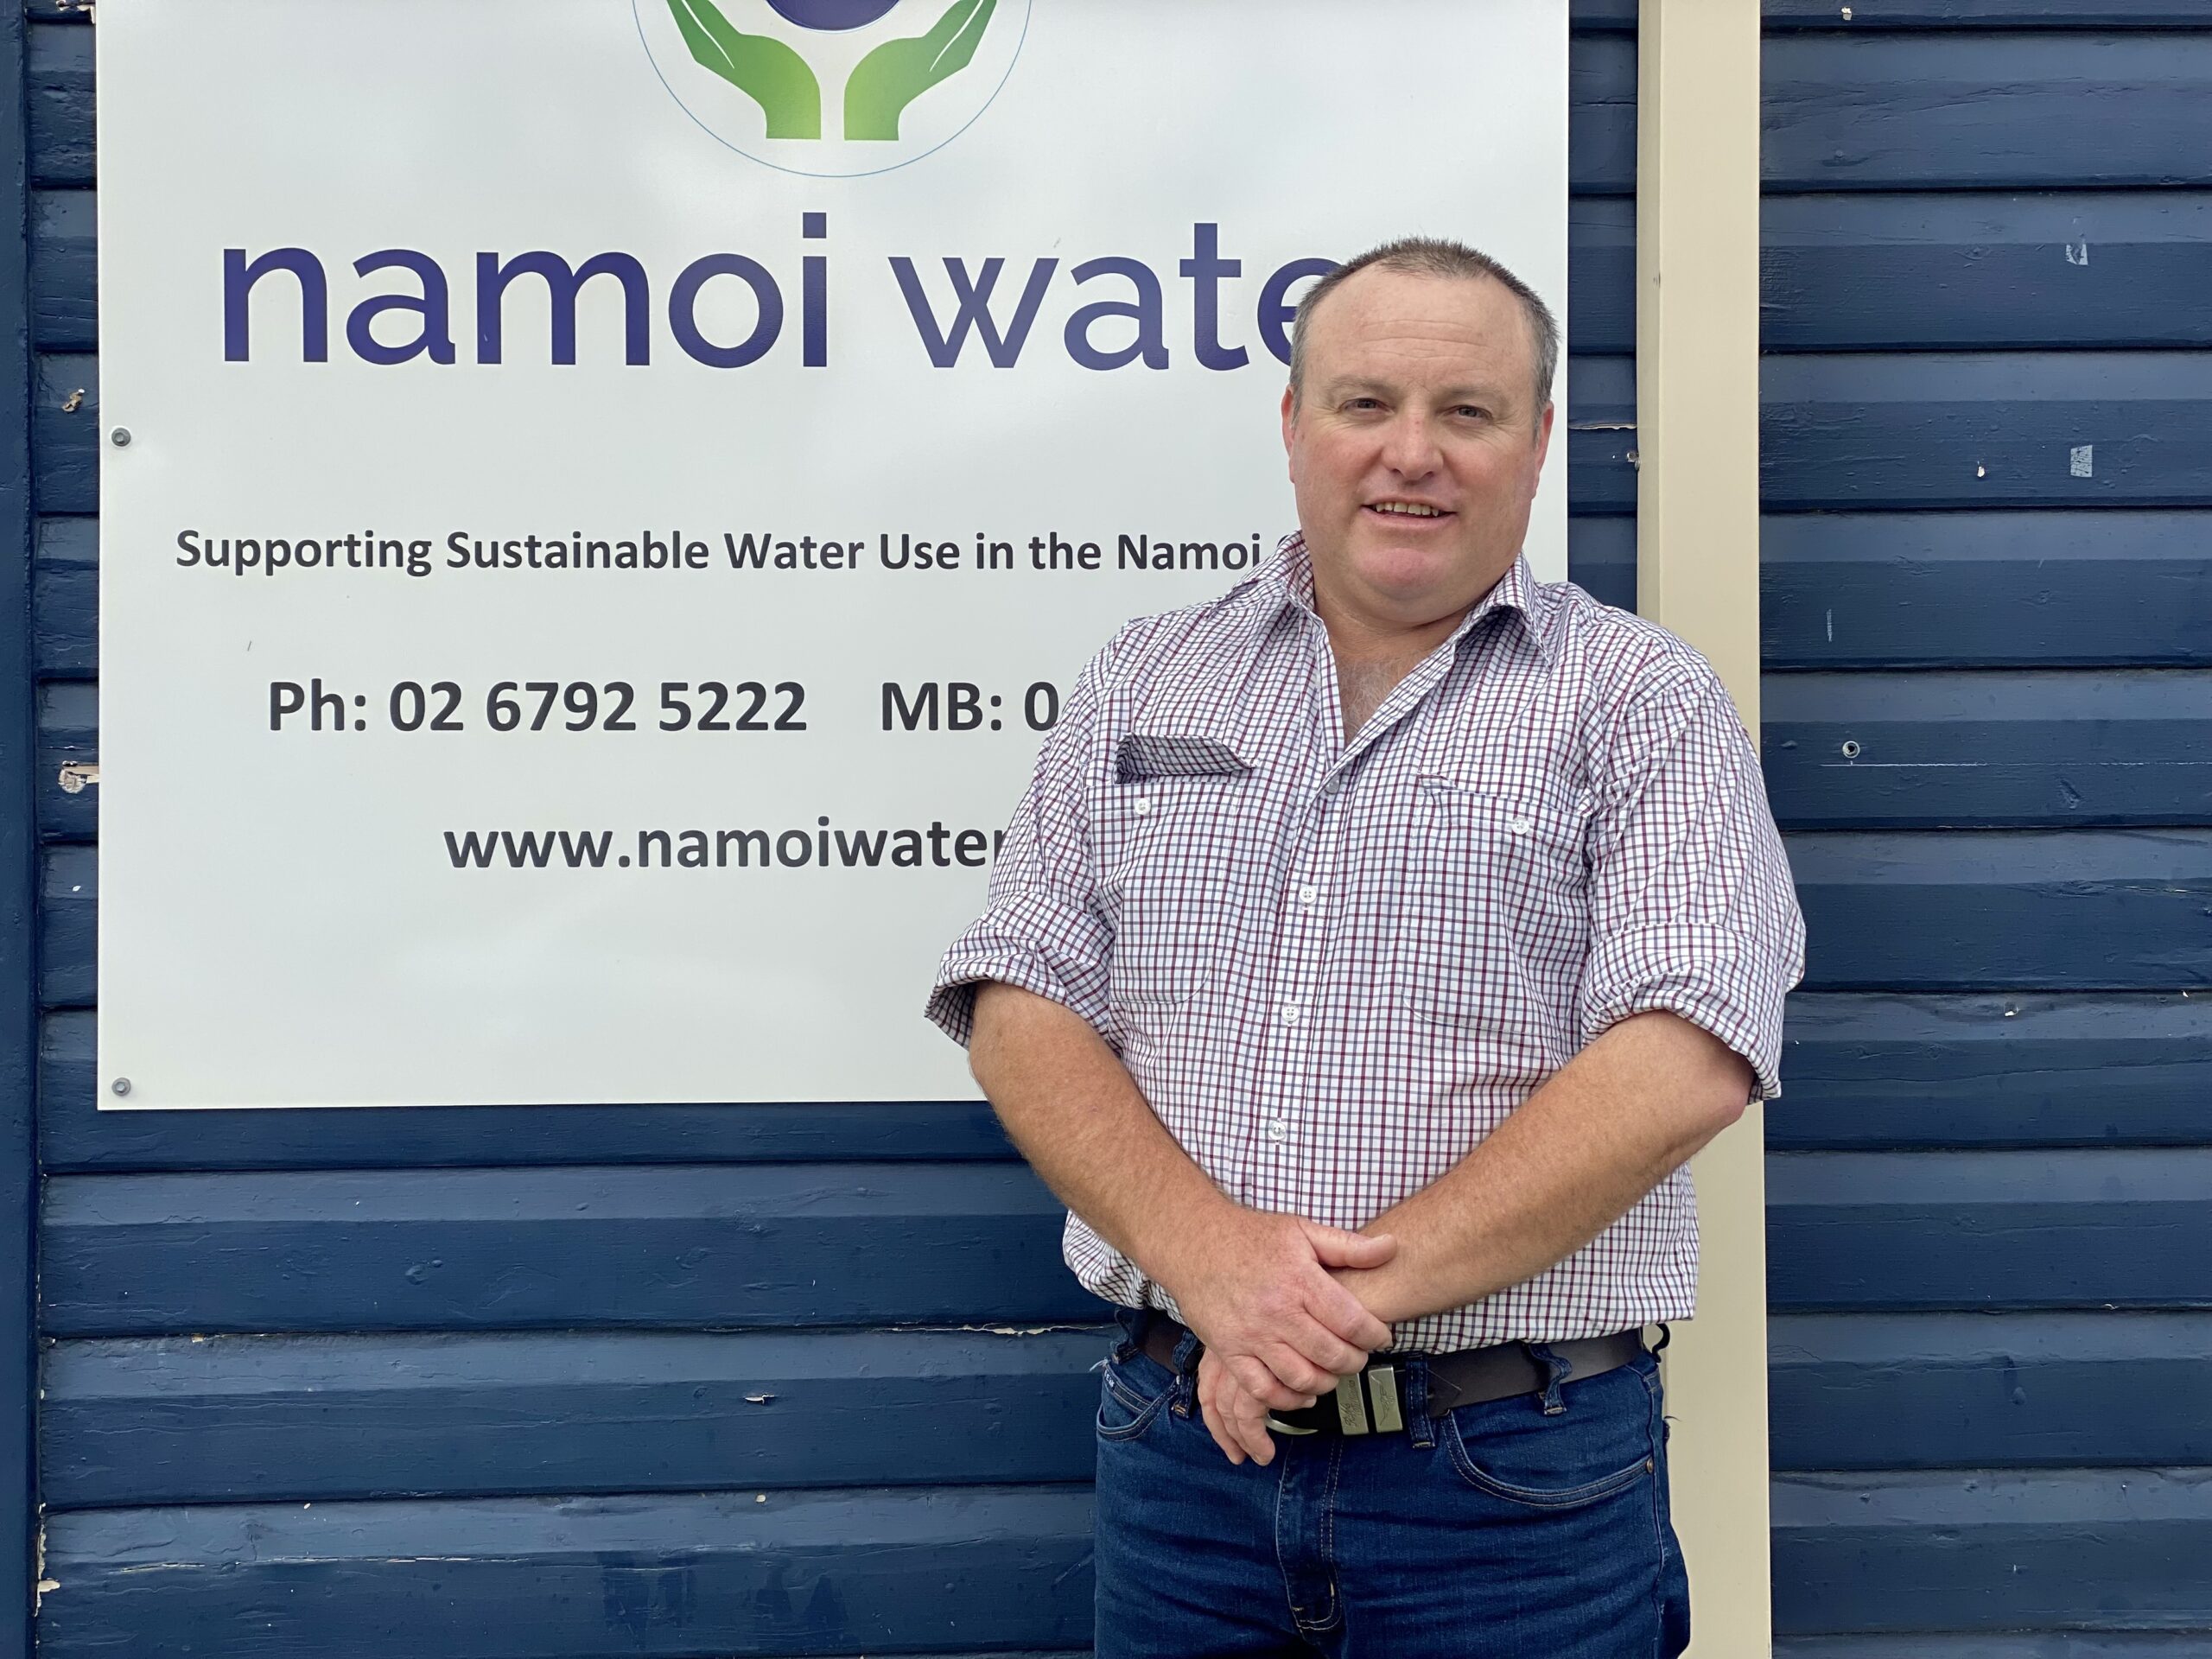 Move straight to buybacks met with frustration by Namoi Water